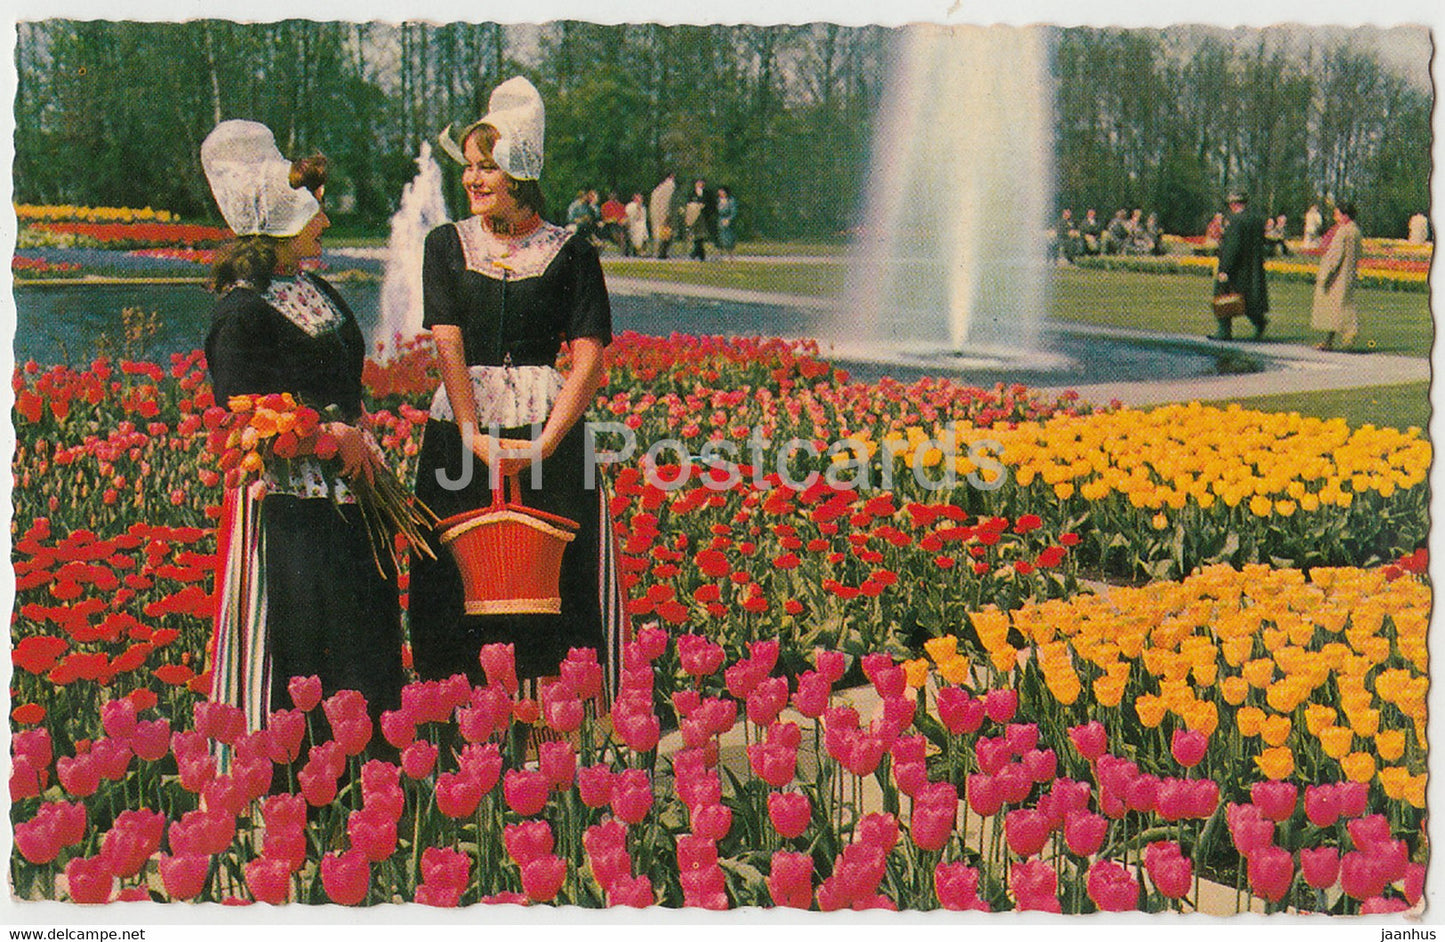 Holland in Bloementooi - Holland in Flowerdecoration - Folk Costumes - Netherlands - used - JH Postcards